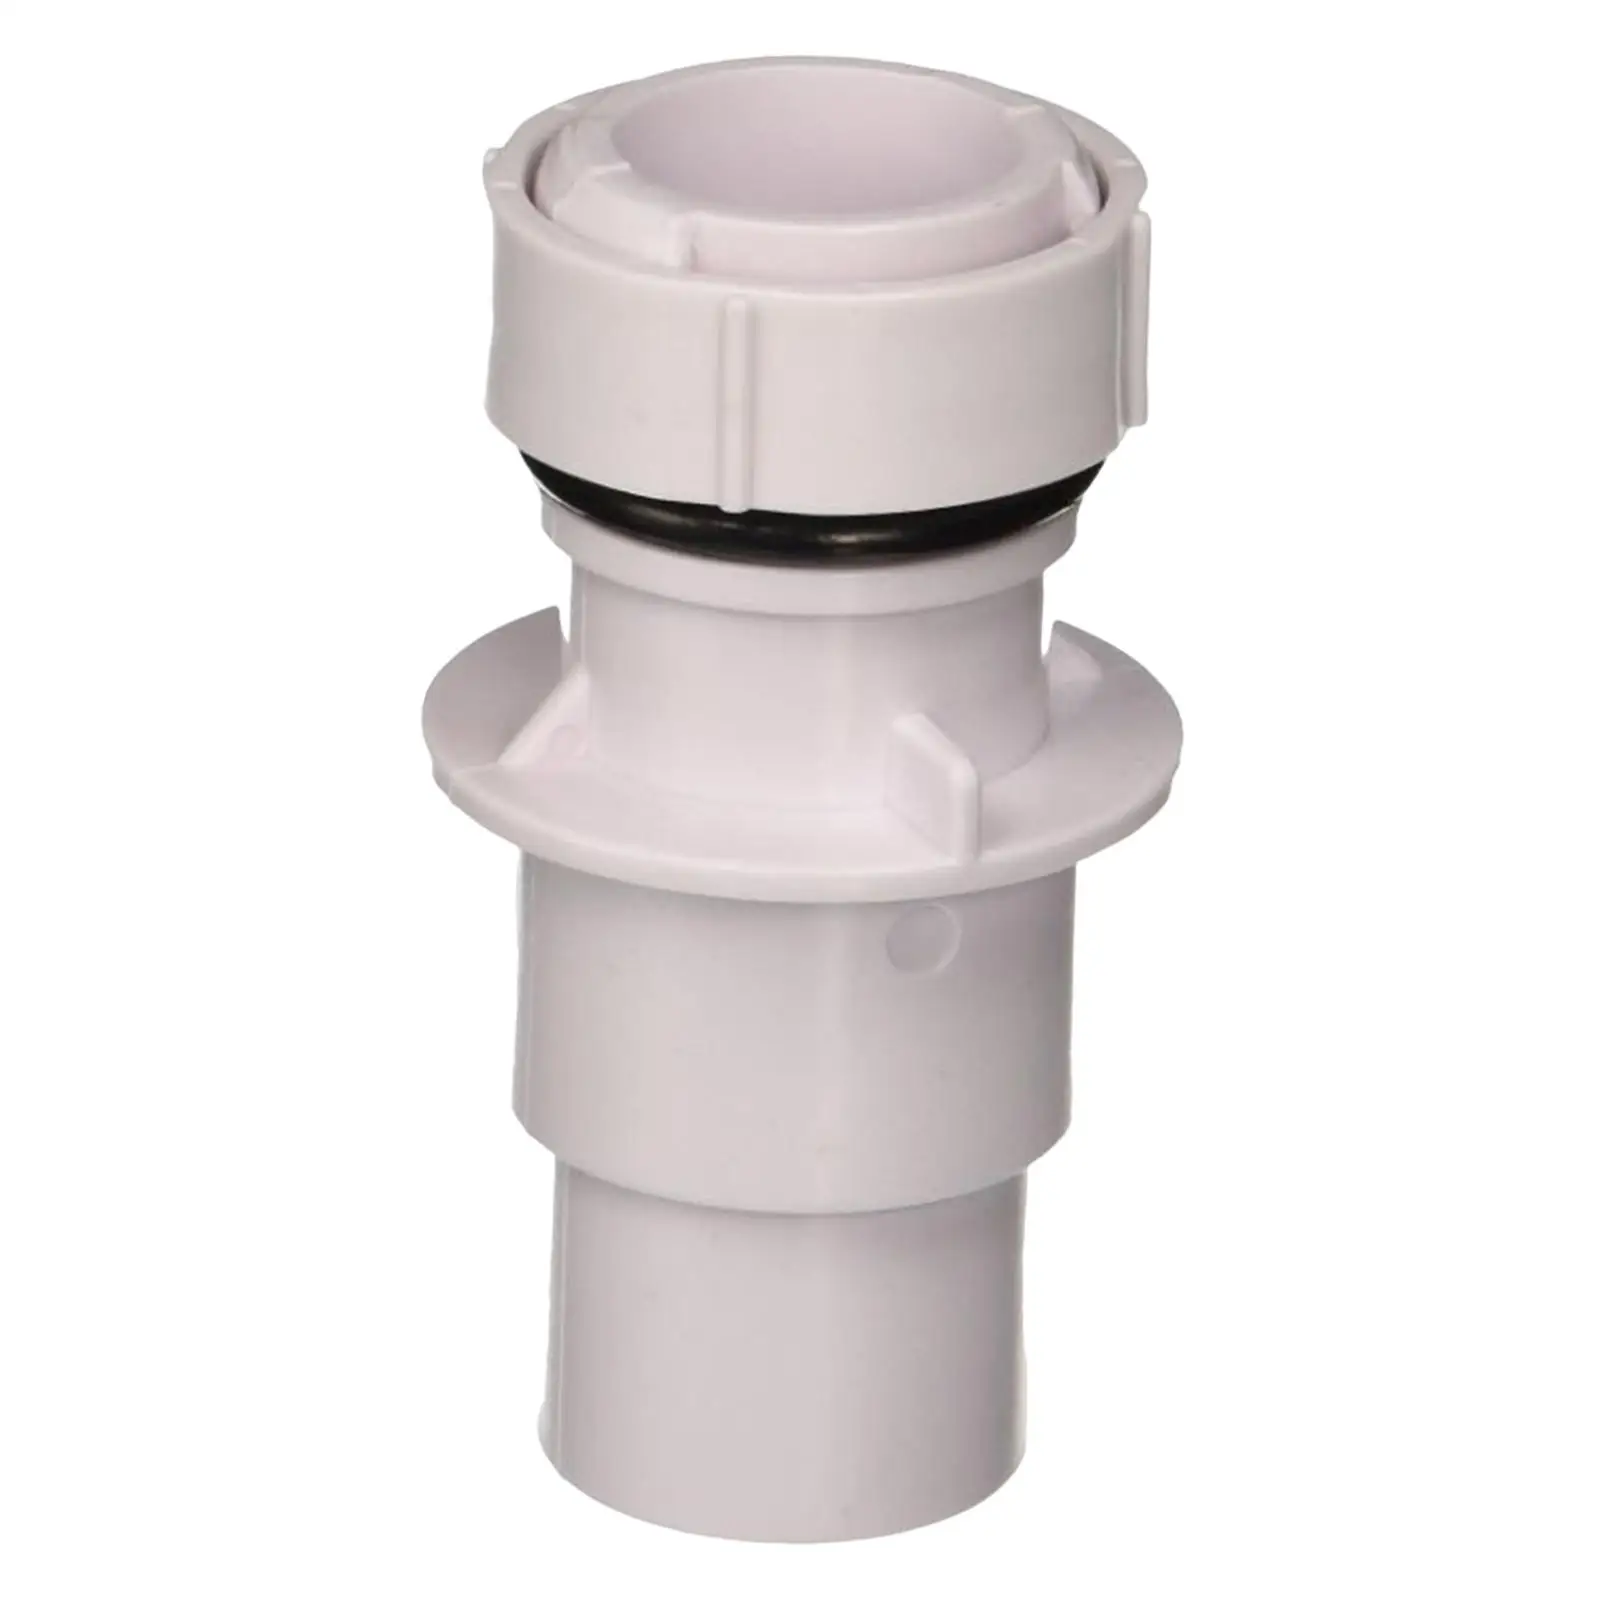 Pool Fittings Quick Connect Sturdy above Ground Pool Hose Coupling for Skimmer Plumbing Connection Filter above Ground Pool Pump